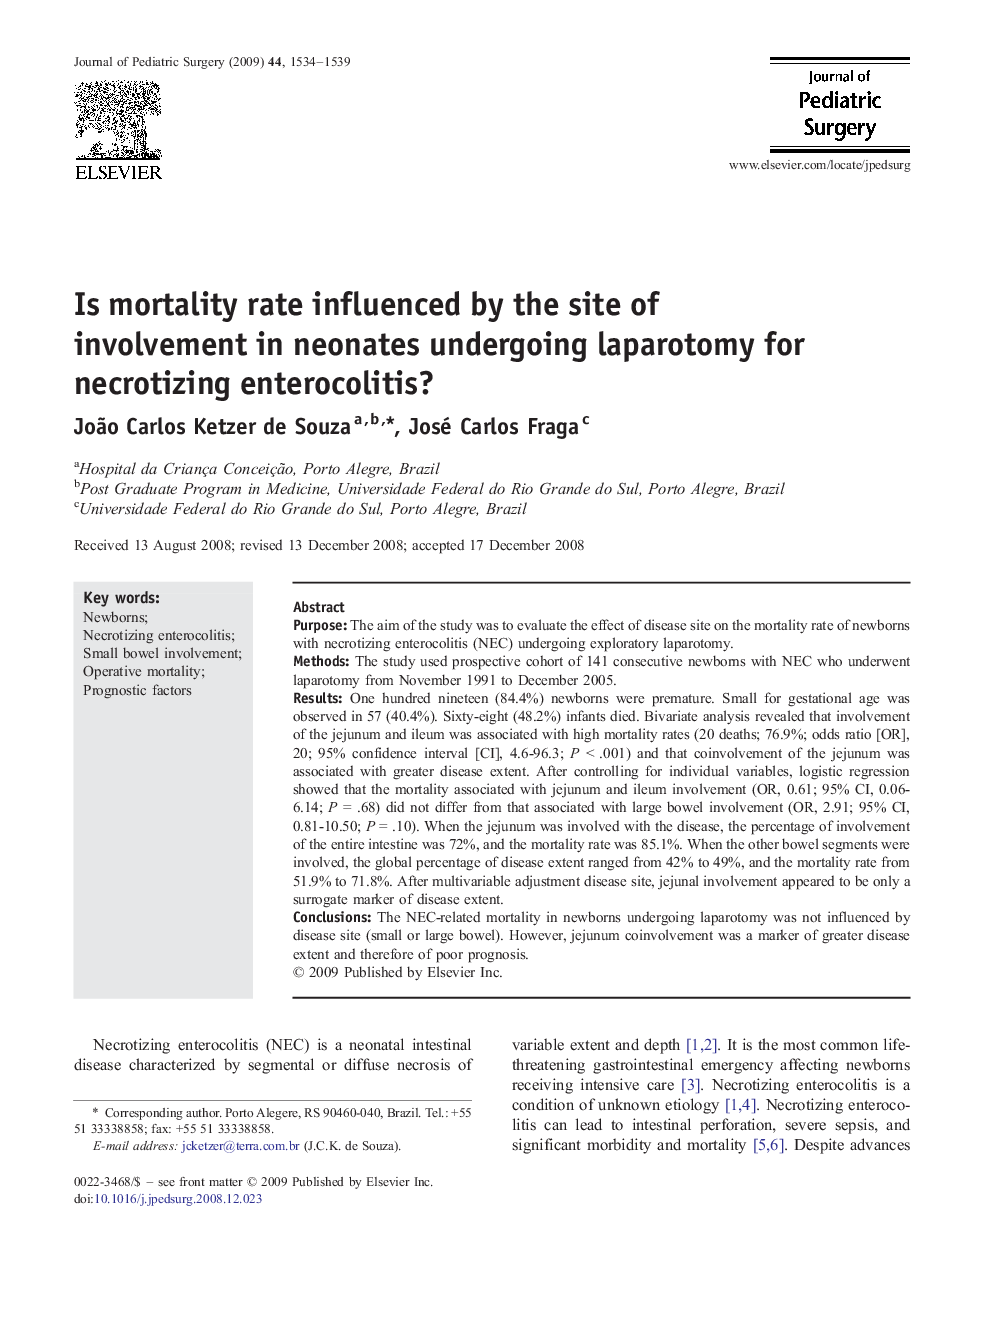 Is mortality rate influenced by the site of involvement in neonates undergoing laparotomy for necrotizing enterocolitis?